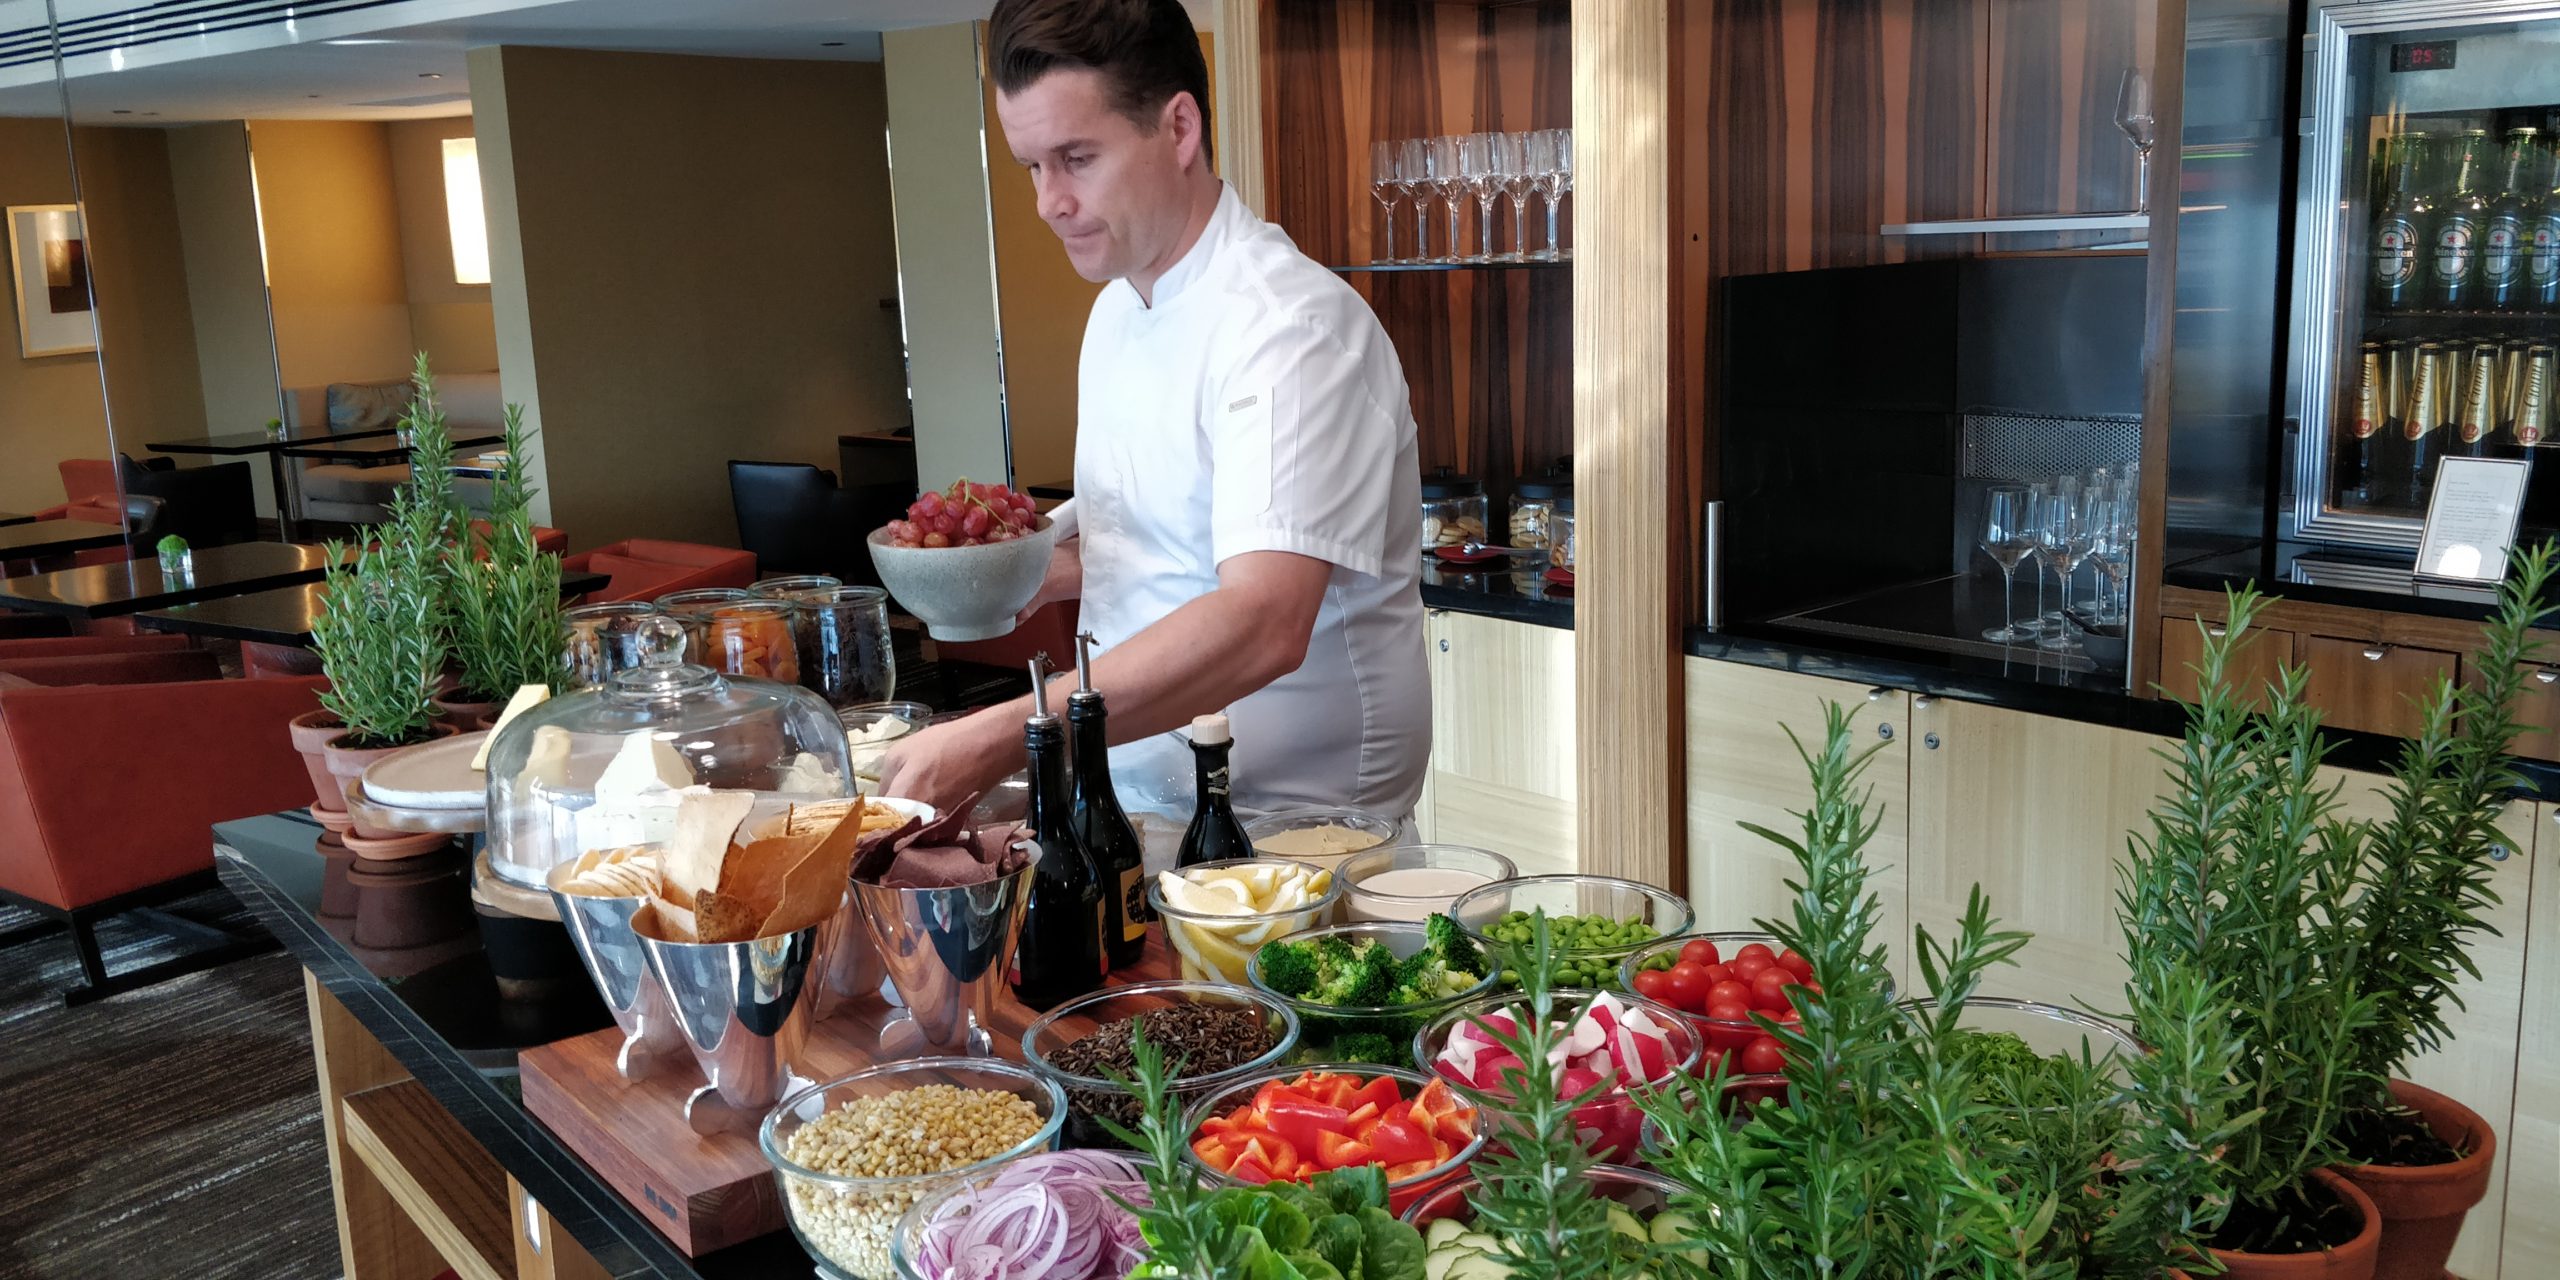 PICTURE OF THE CHEF PREPARING CANAPES